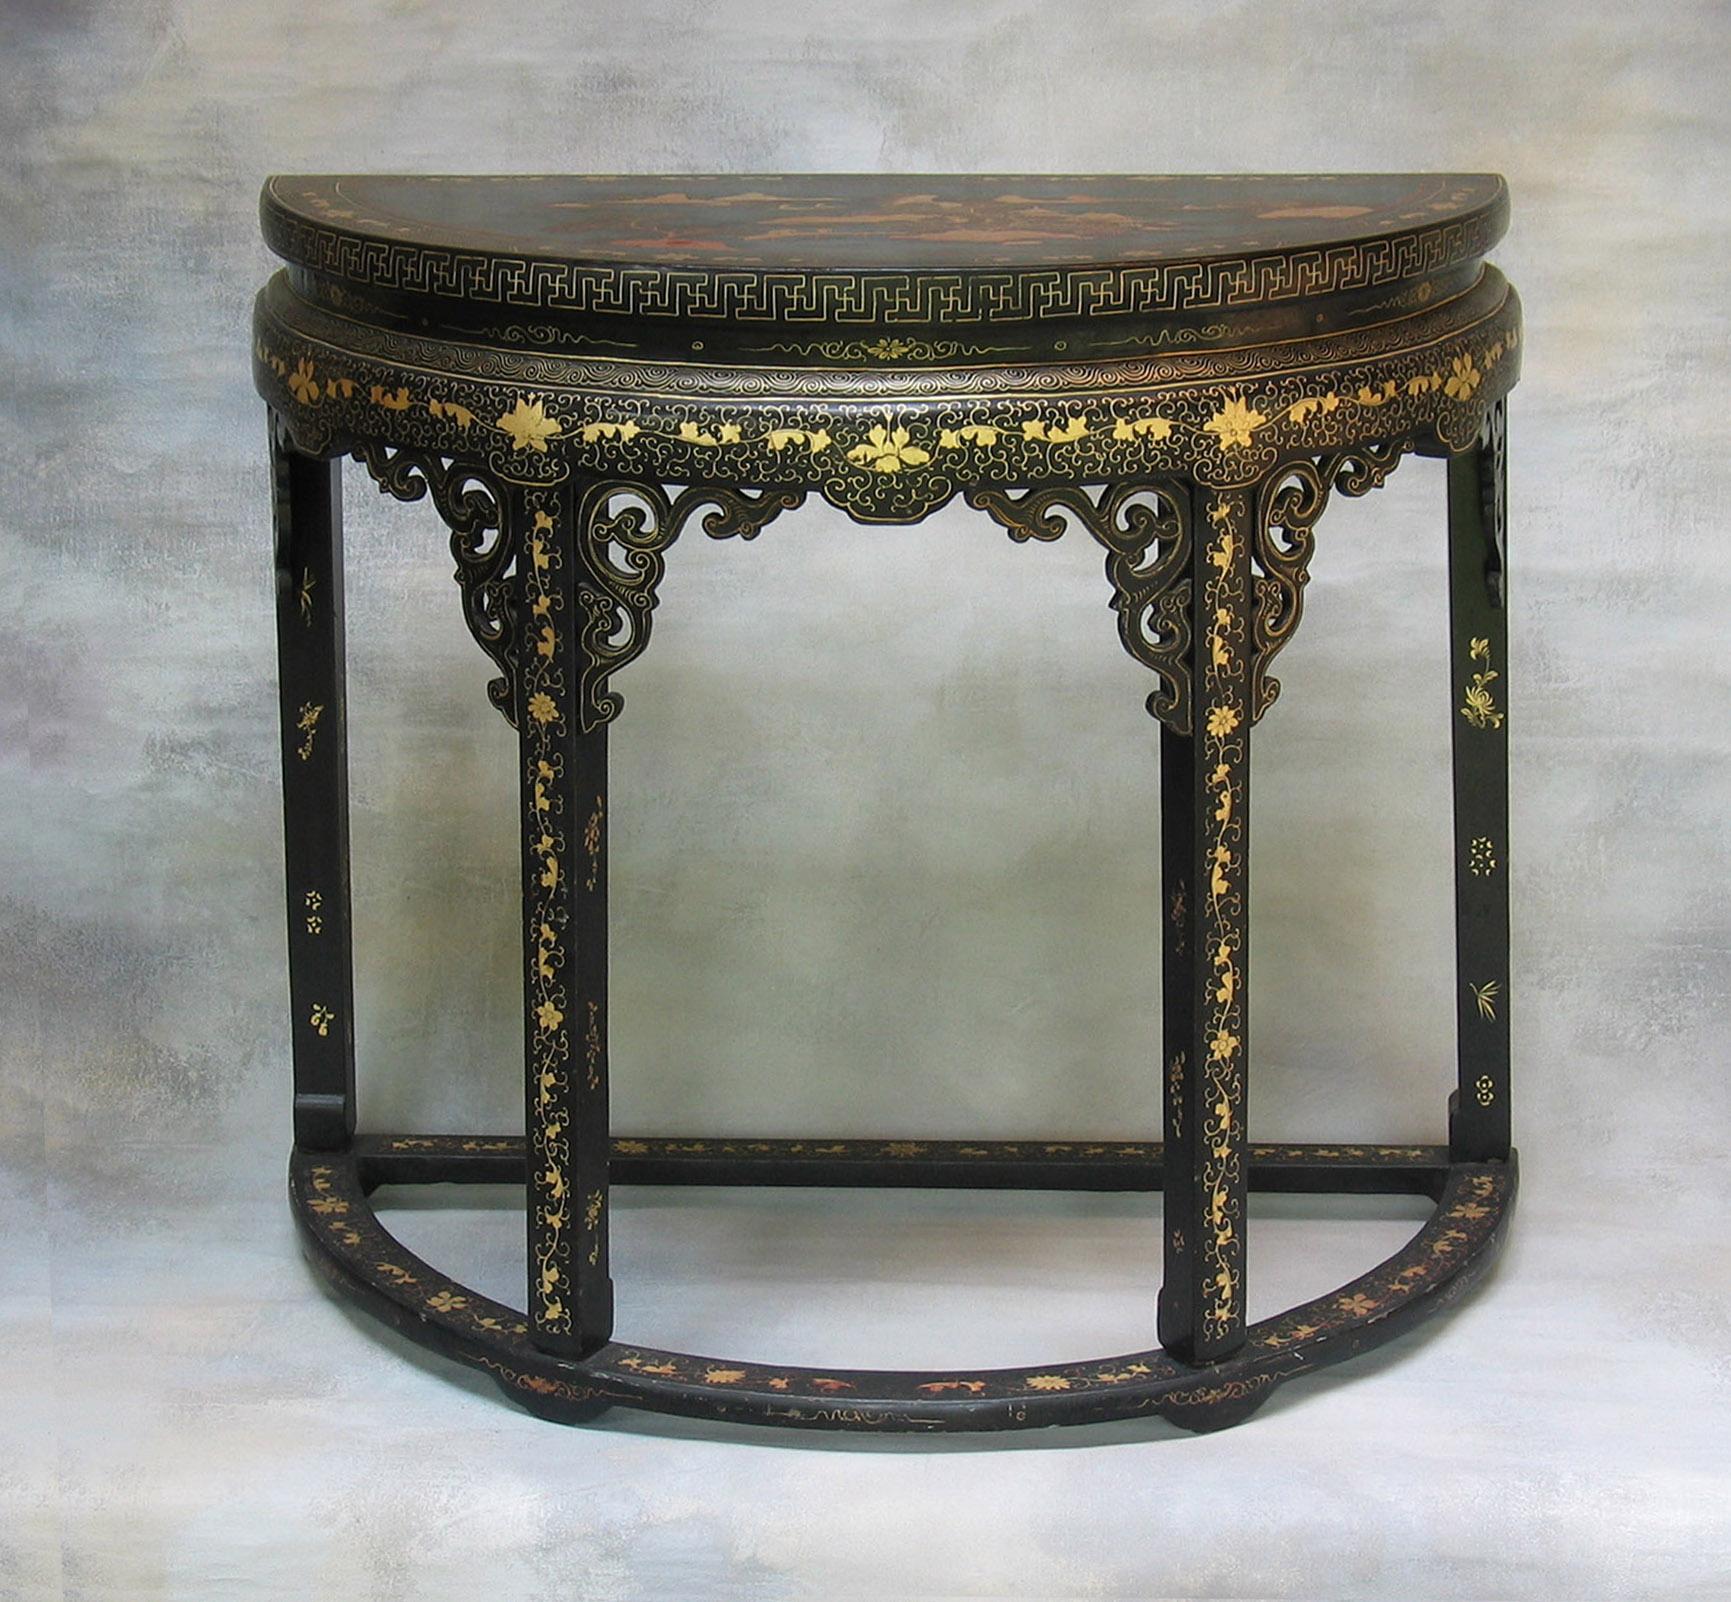 Chinese Export Gilt Lacquer Decorated Demi-lune Console Table Early 19th Century For Sale 6